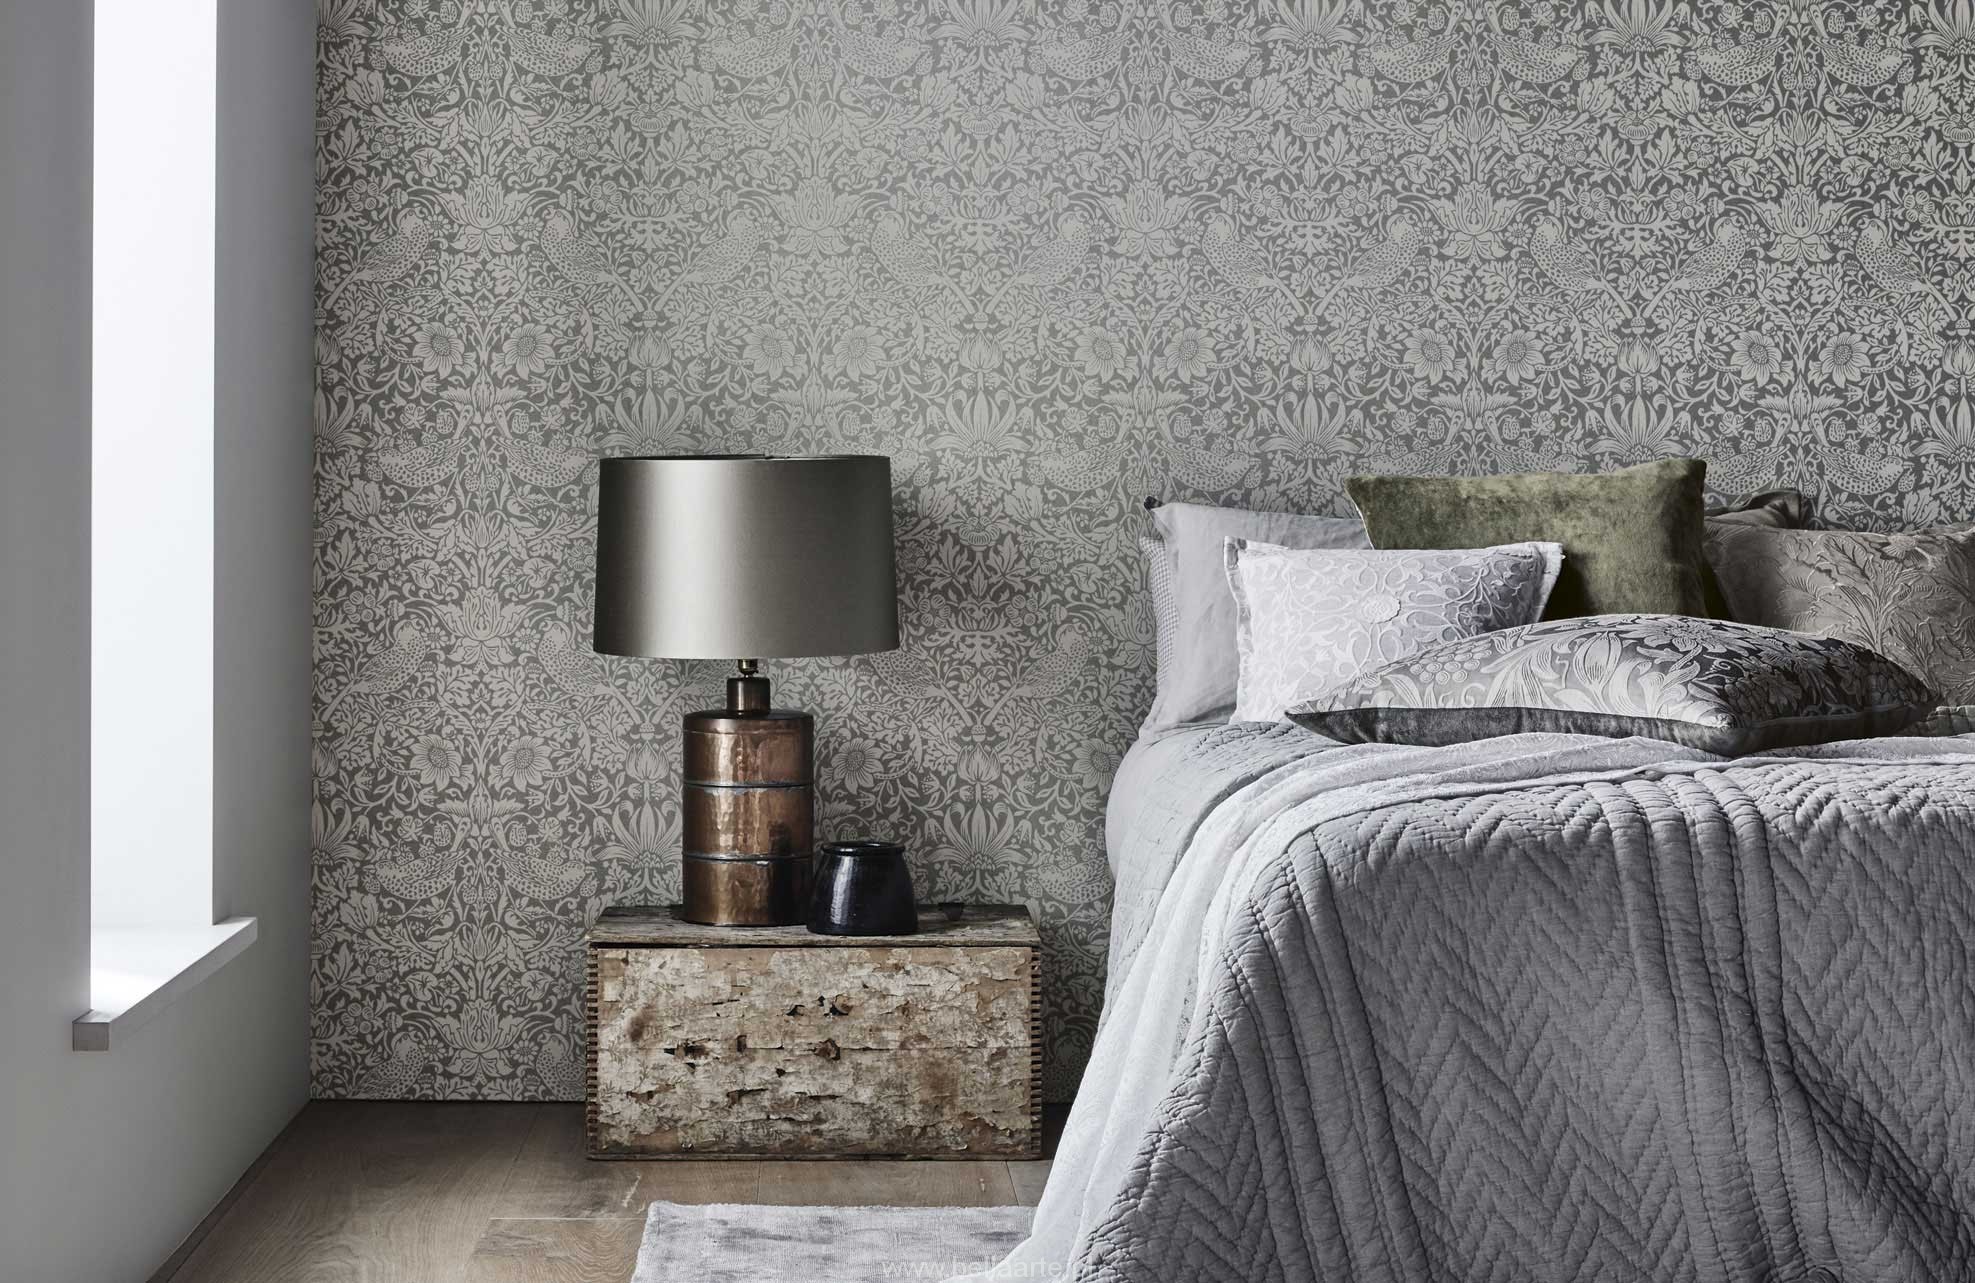 8 Wallpaper Design Trends for 2017 that you will Love